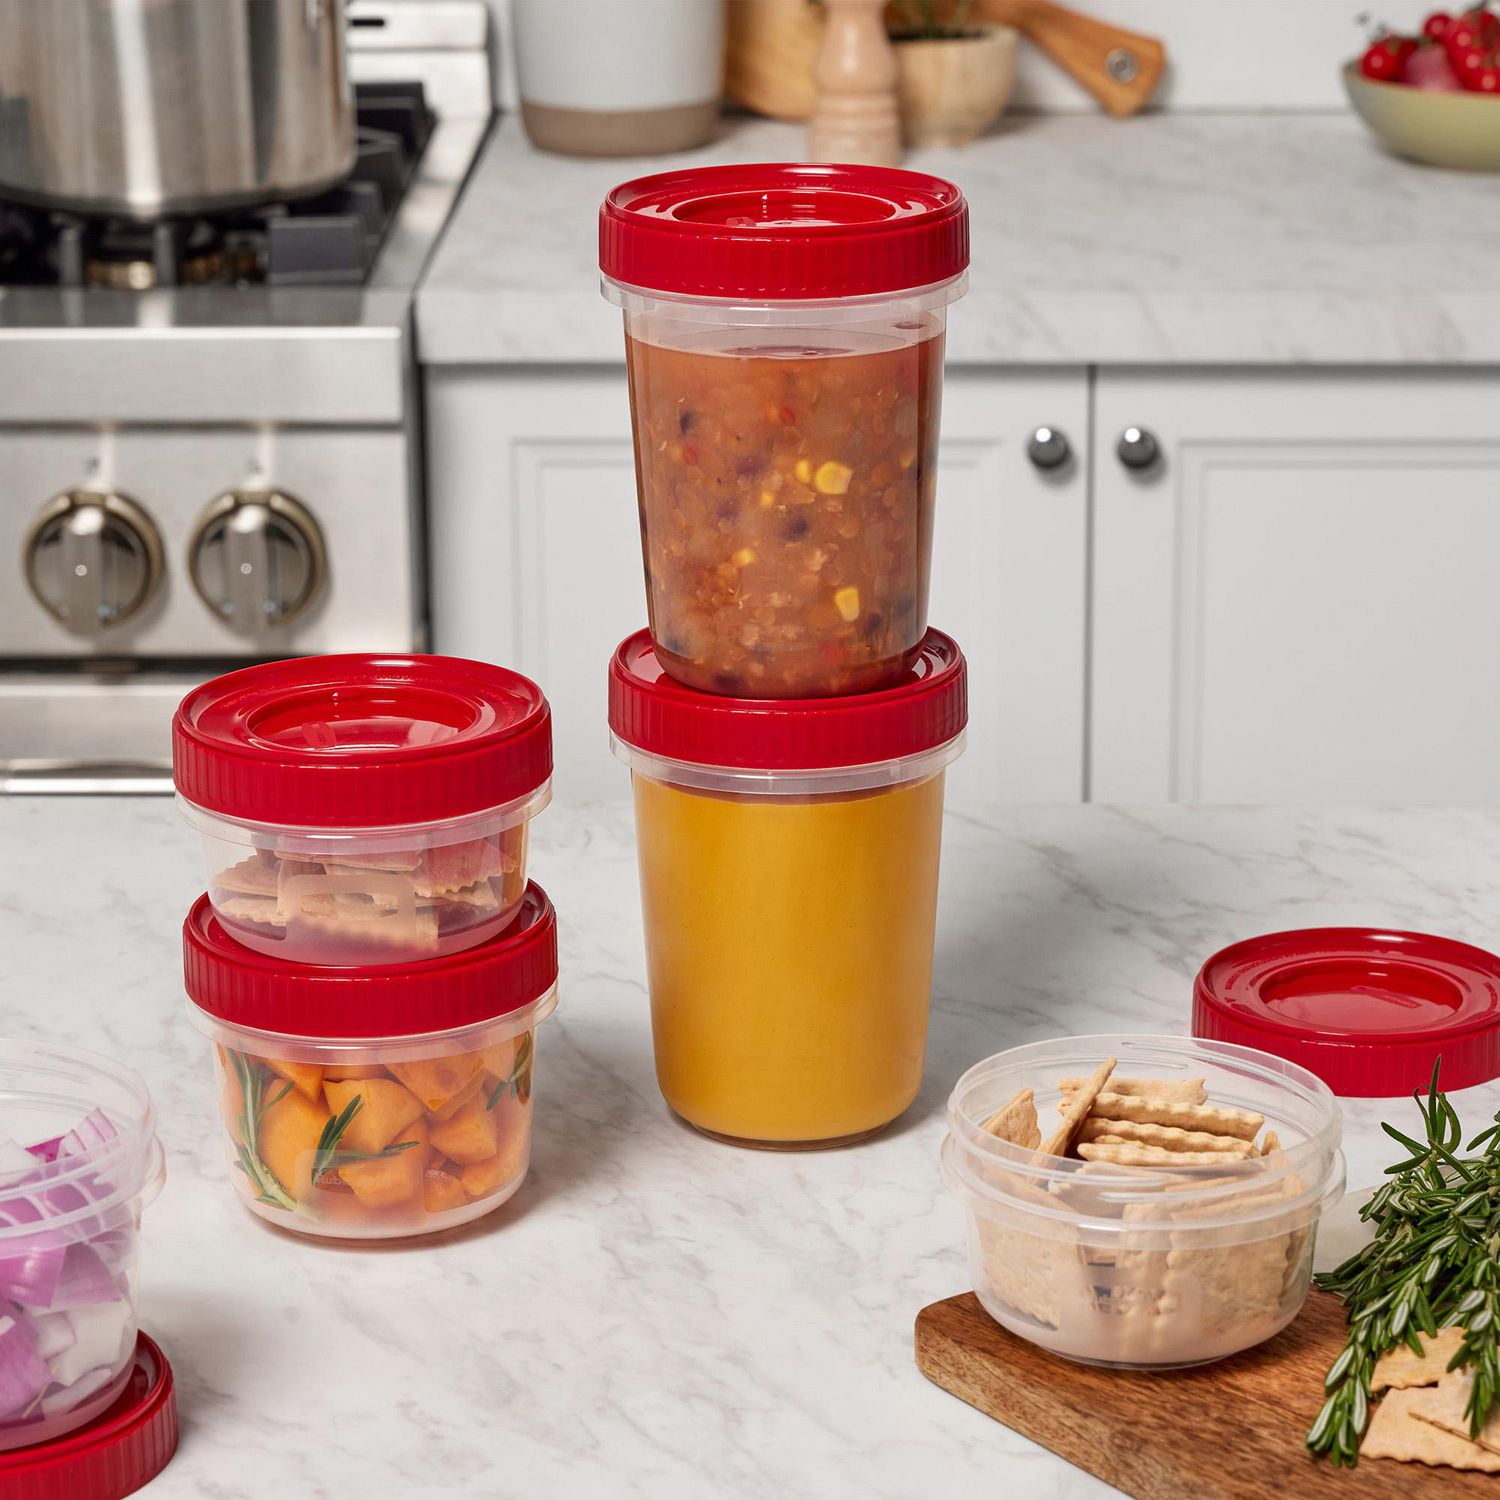 Rubbermaid TakeAlongs Twist & Seal Food Storage Containers, Ruby